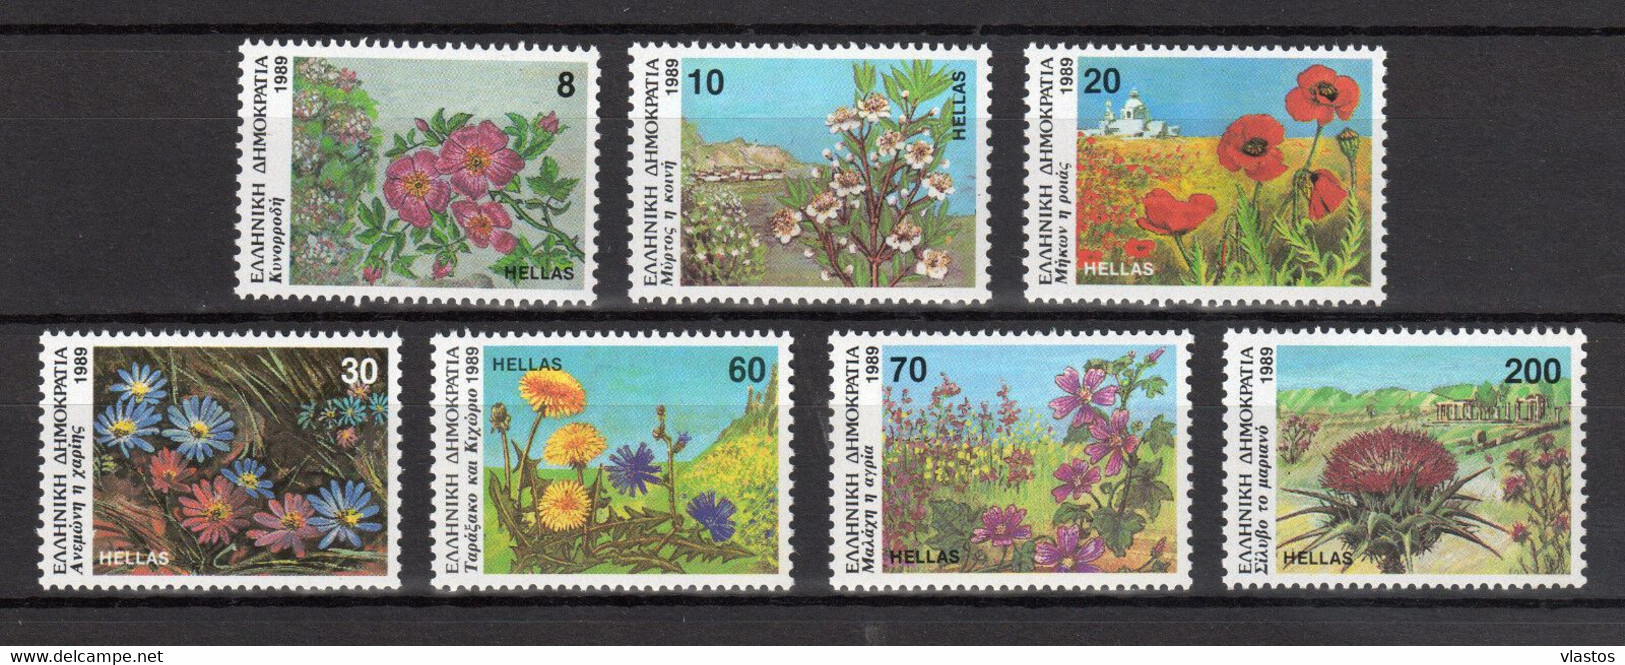 GREECE 1989 COMPLETE YEAR - PERFORATED STAMPS MNH